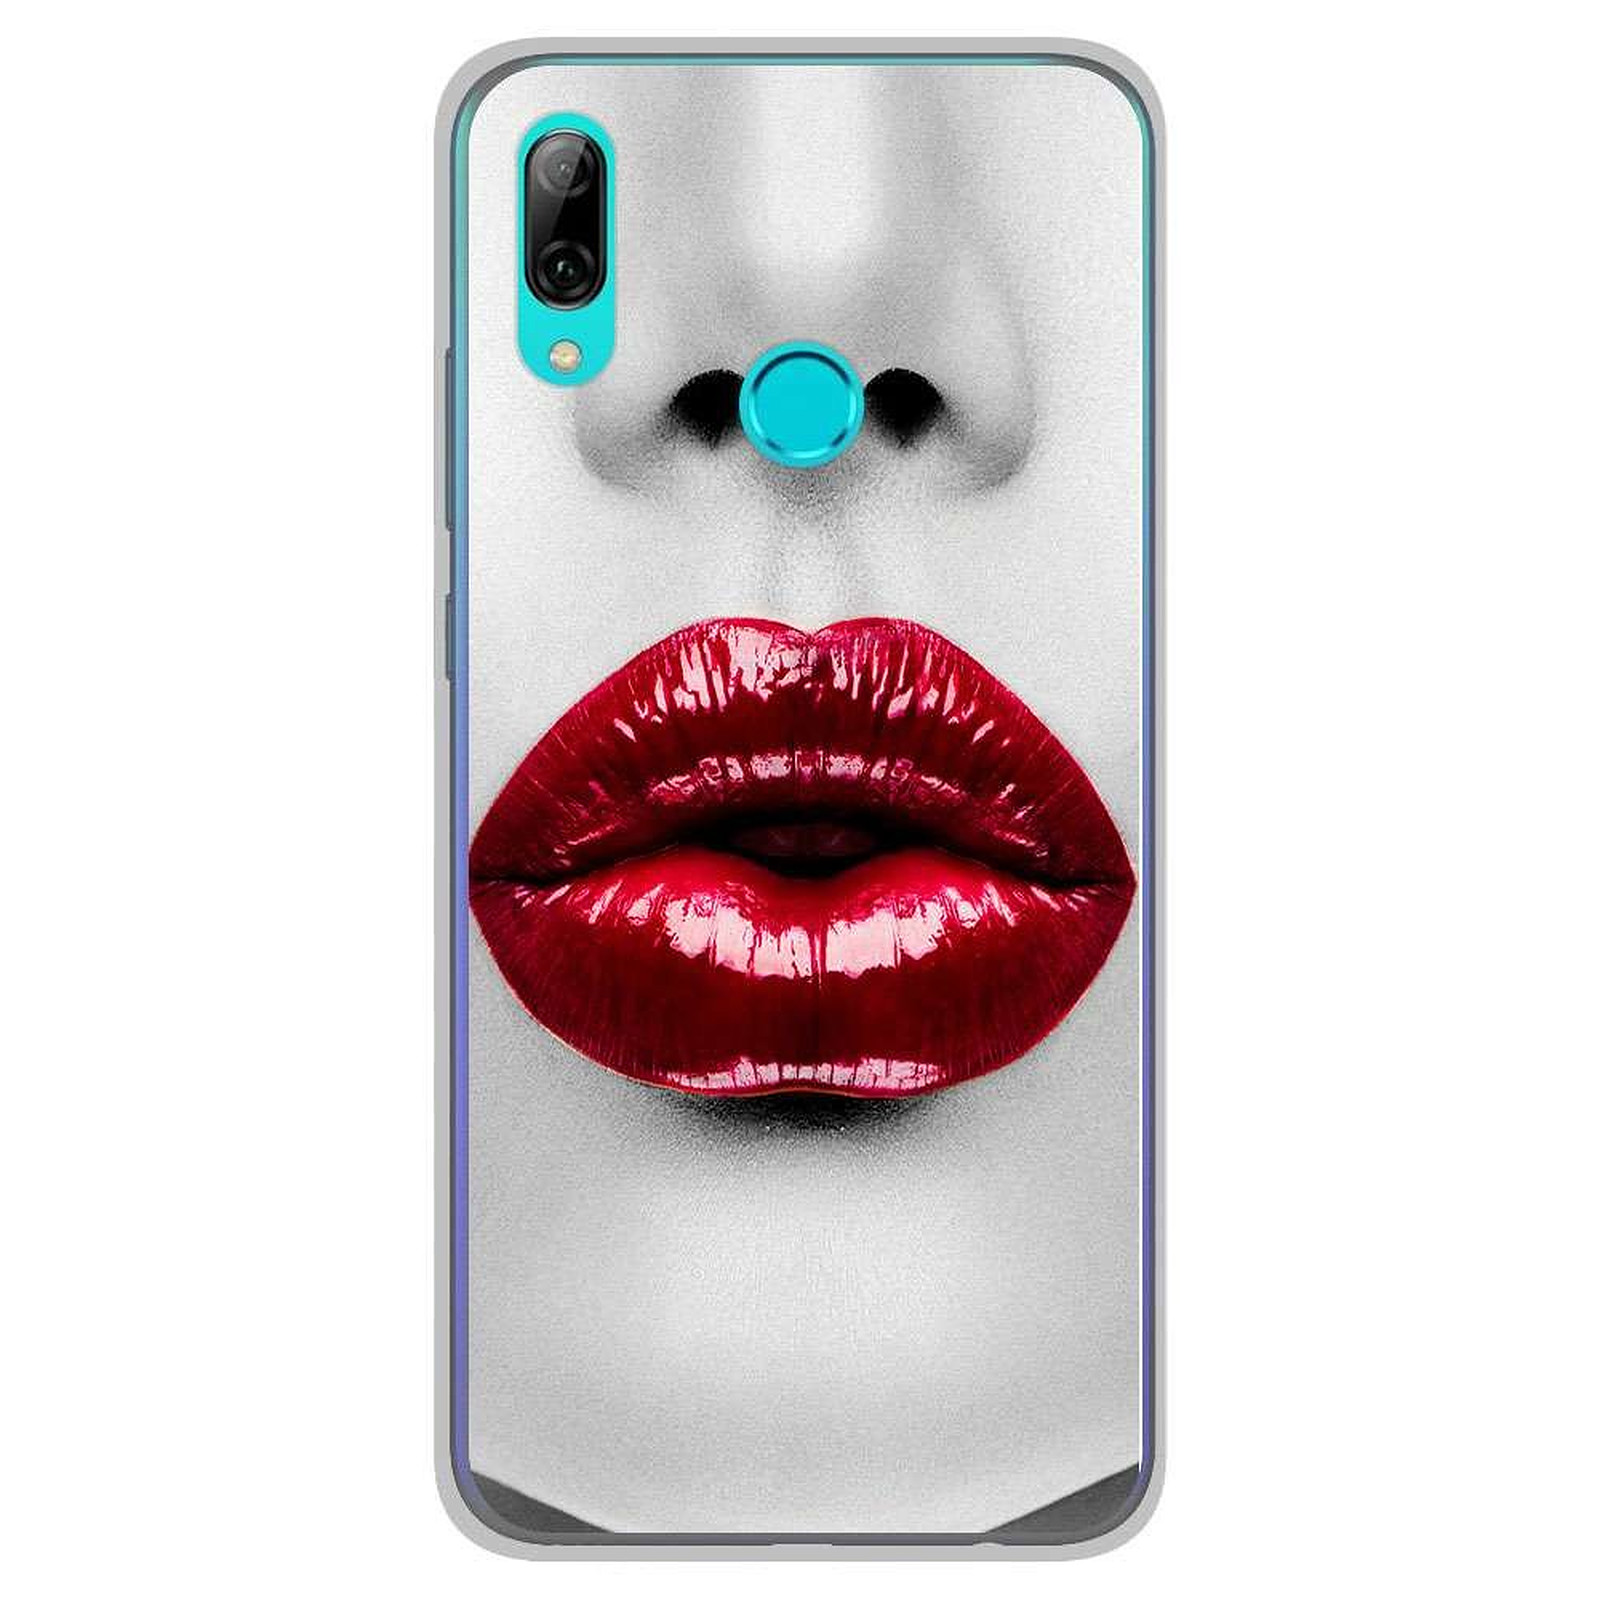 1001 Coques Coque silicone gel Huawei P Smart 2019 motif Lèvres Rouges - Coque telephone 1001Coques